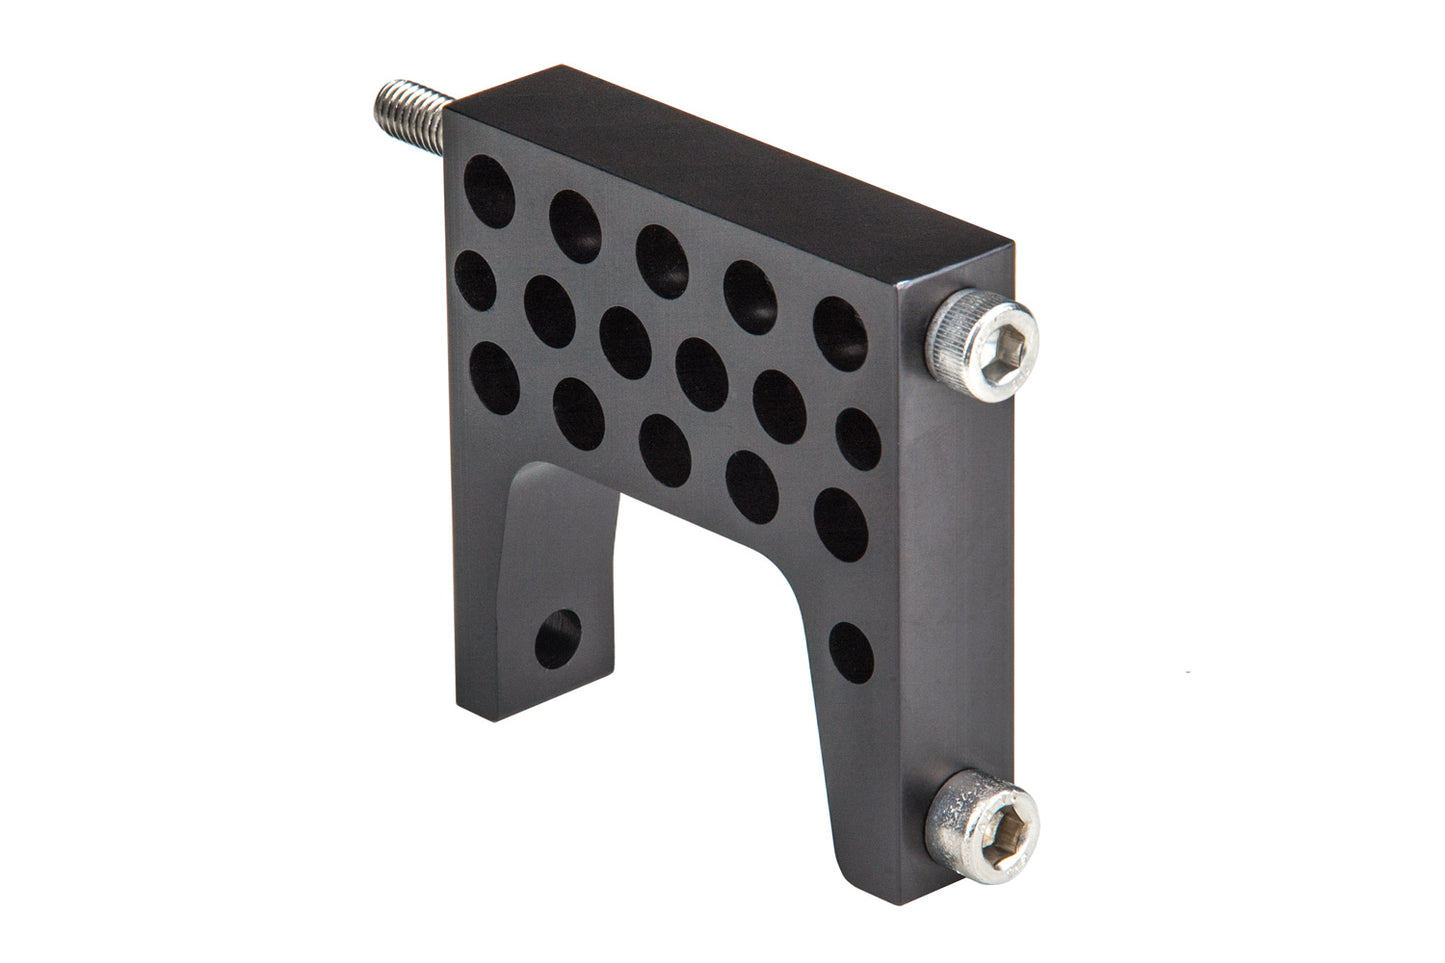 Frame clamp for SPRING, WINTR and universal battery mount